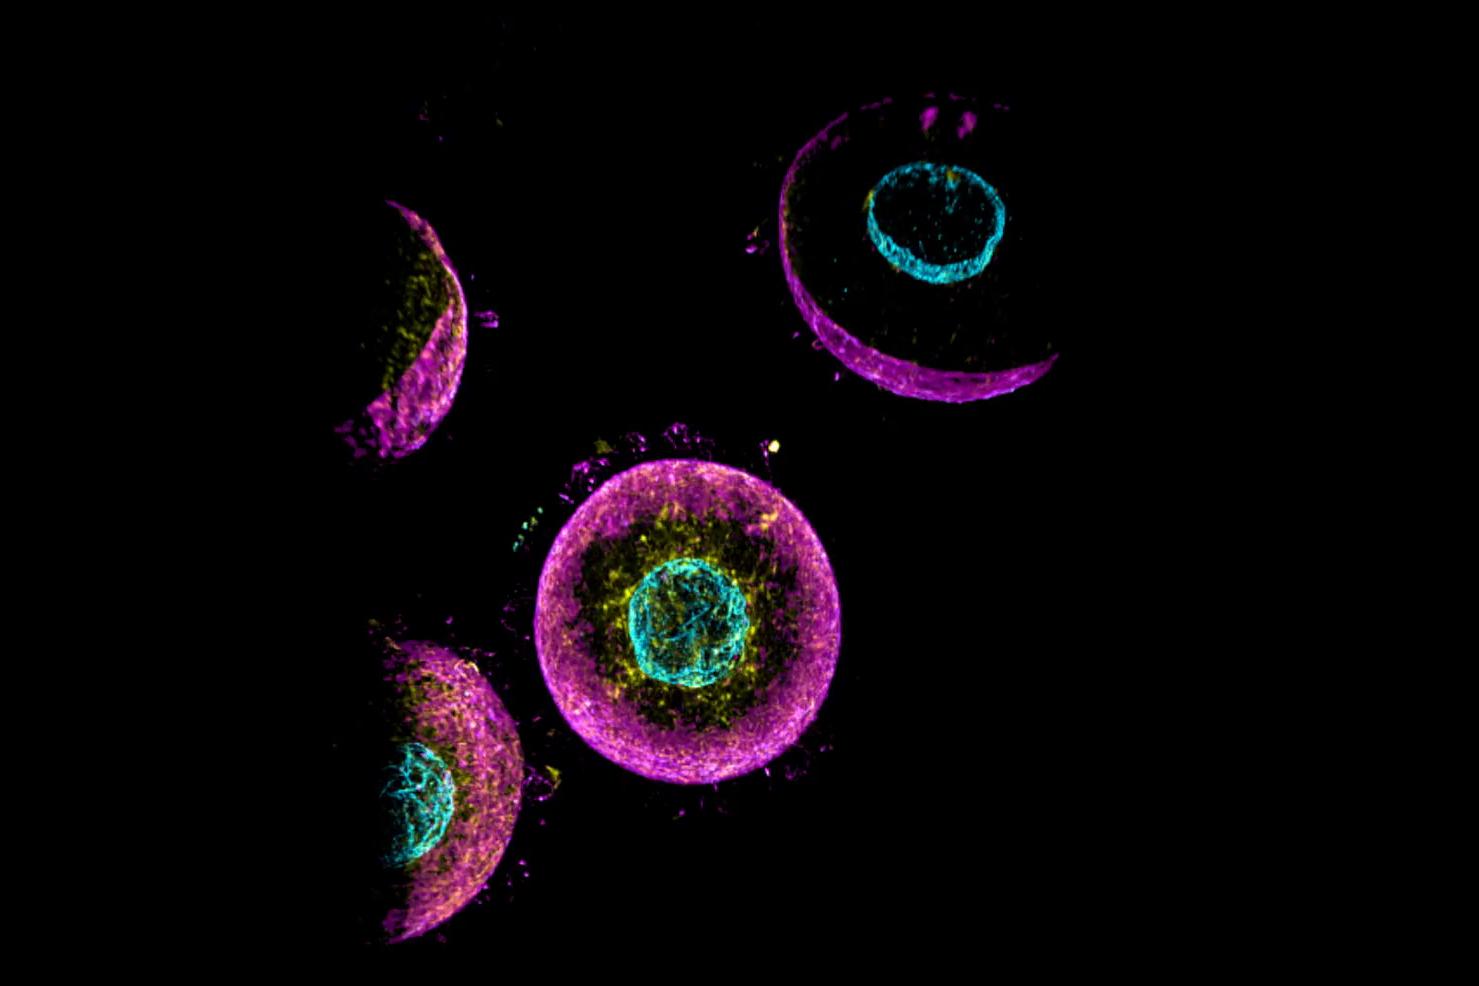 Fixed mouse germinal vesicle oocytes stained for the nuclear envelope (anti-lamin, cyan), actin (phalloidin, magenta), and microtubules (anti-tubulin, yellow). The Sinc3 100 × 1,800 lattice light sheet was used for imaging of the whole oocyte. 